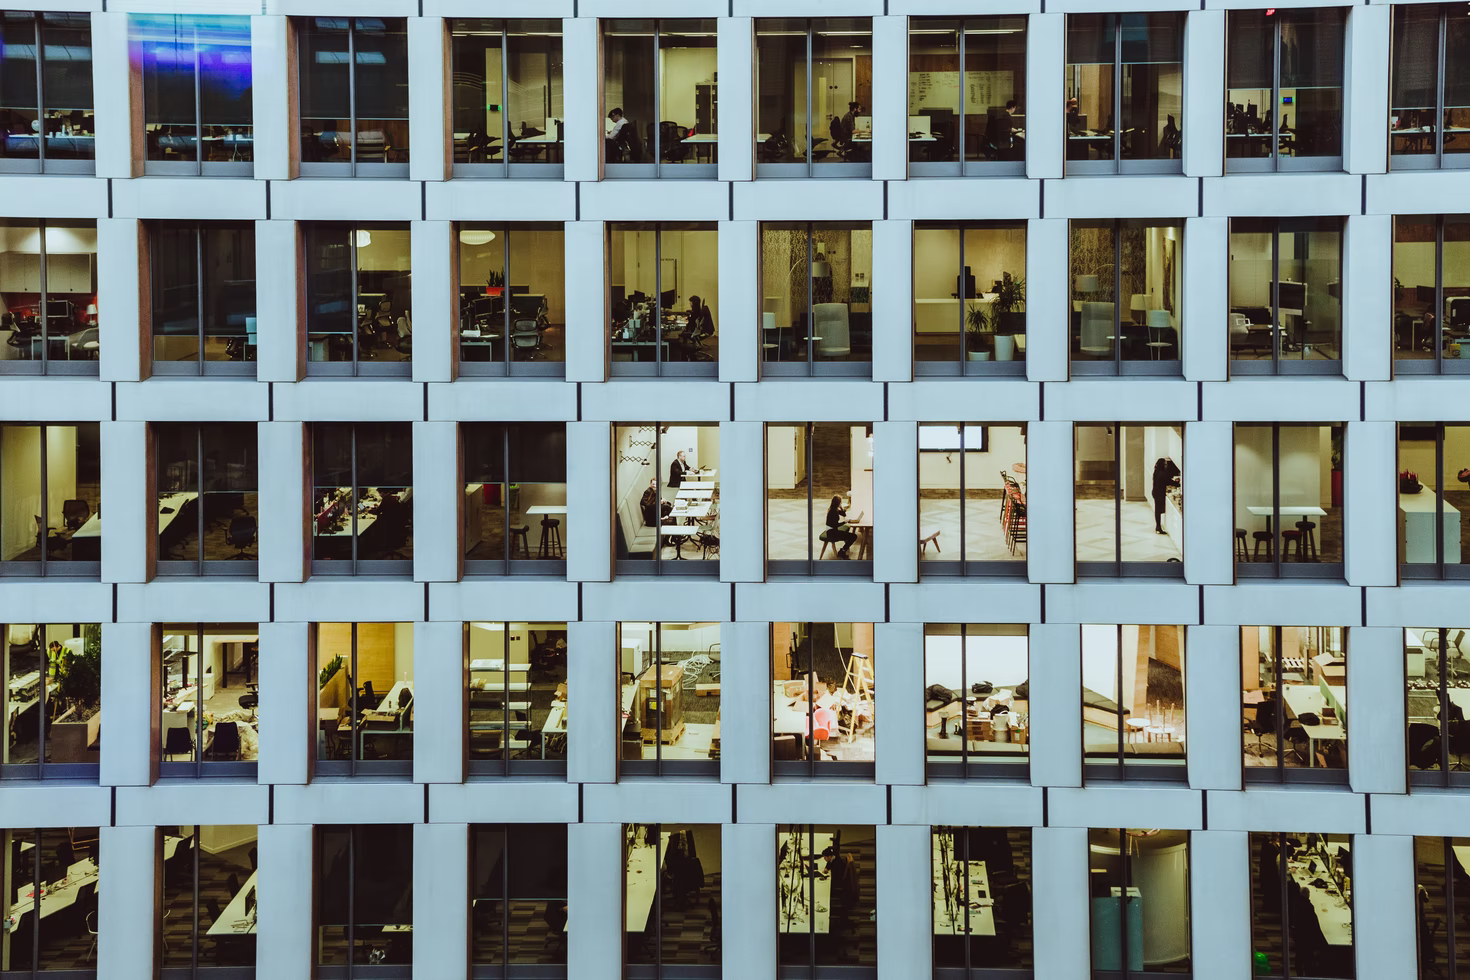 Image of many windows in a multistory office building